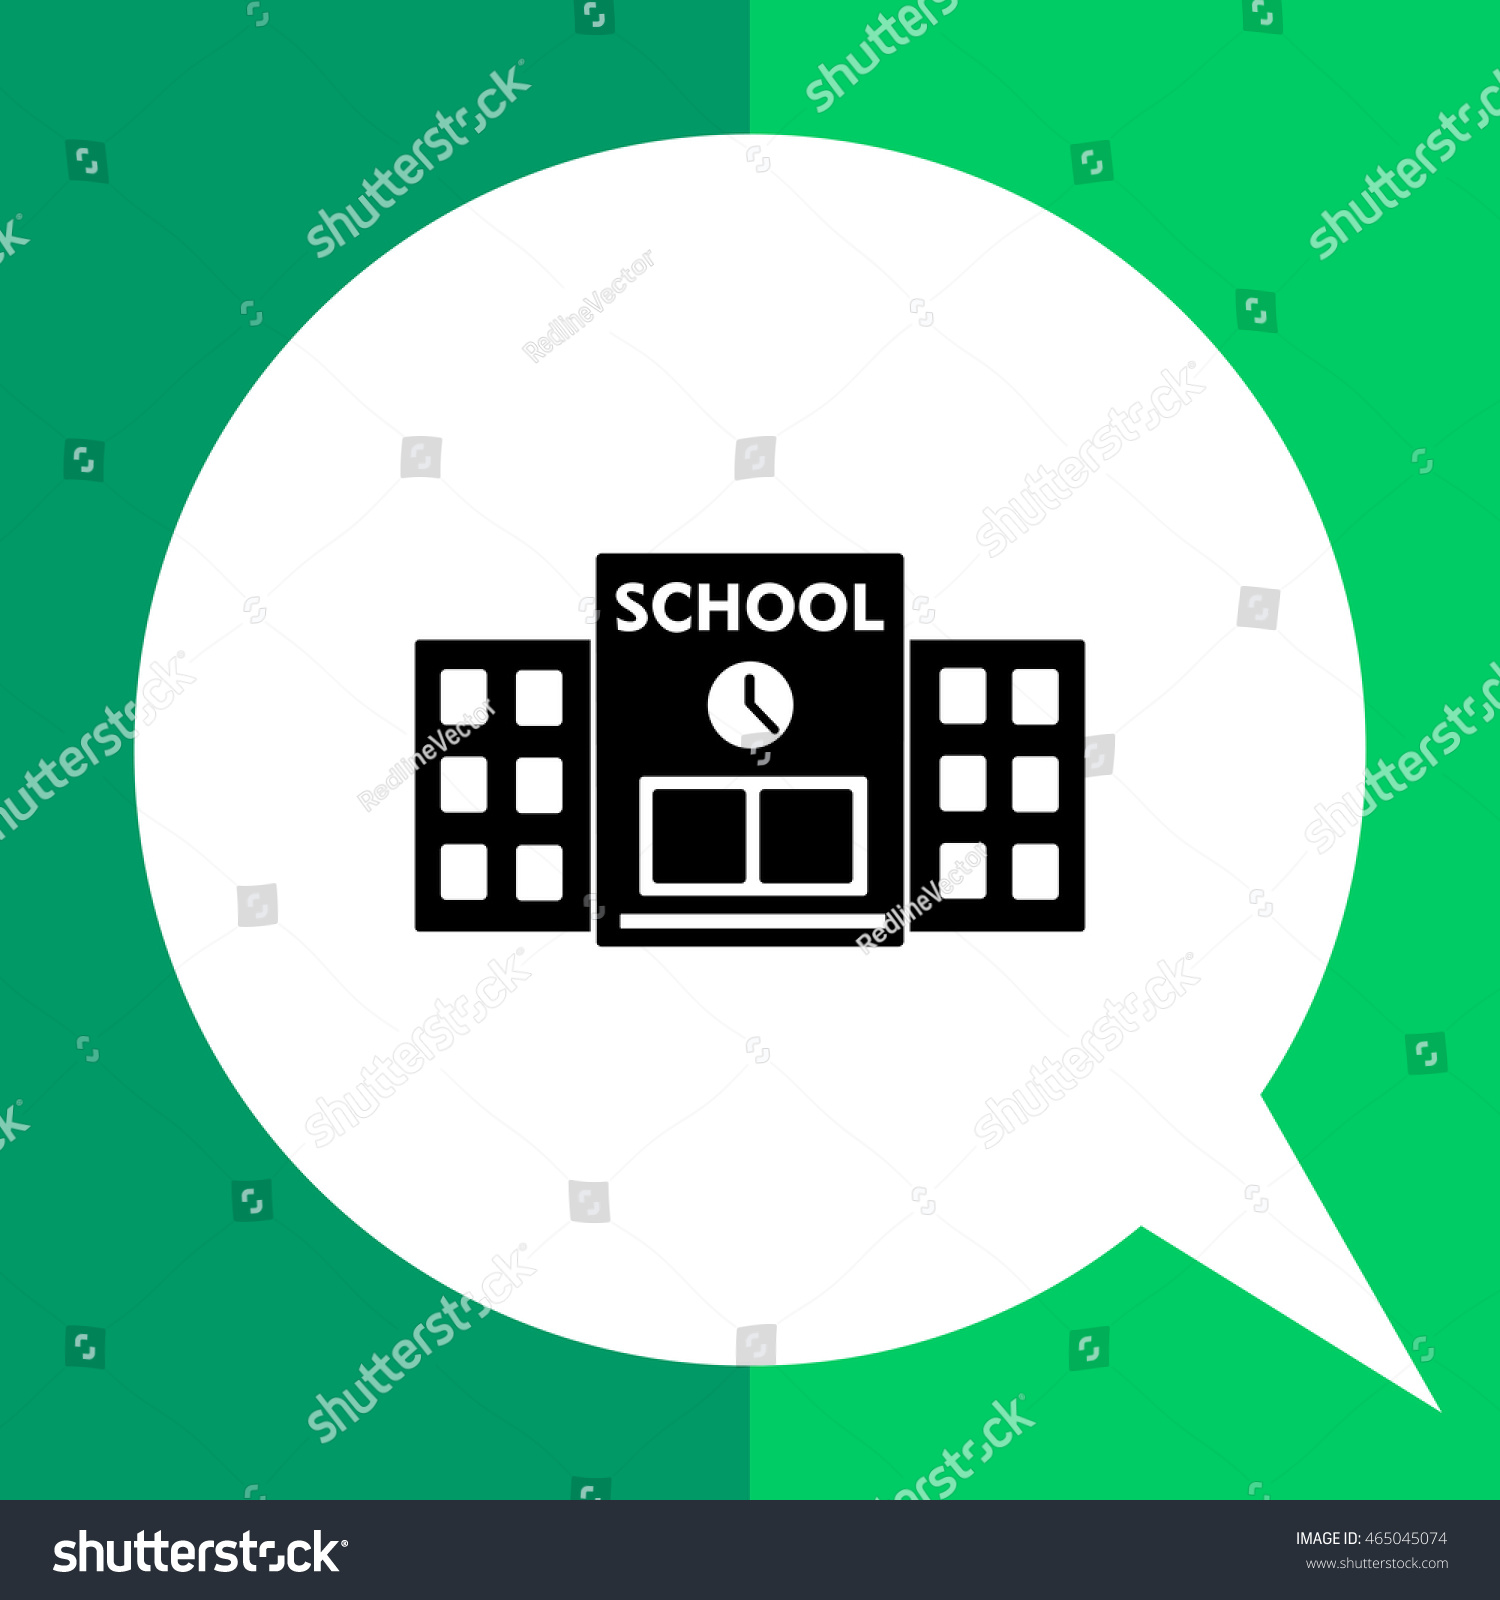 sketchup for schools icons